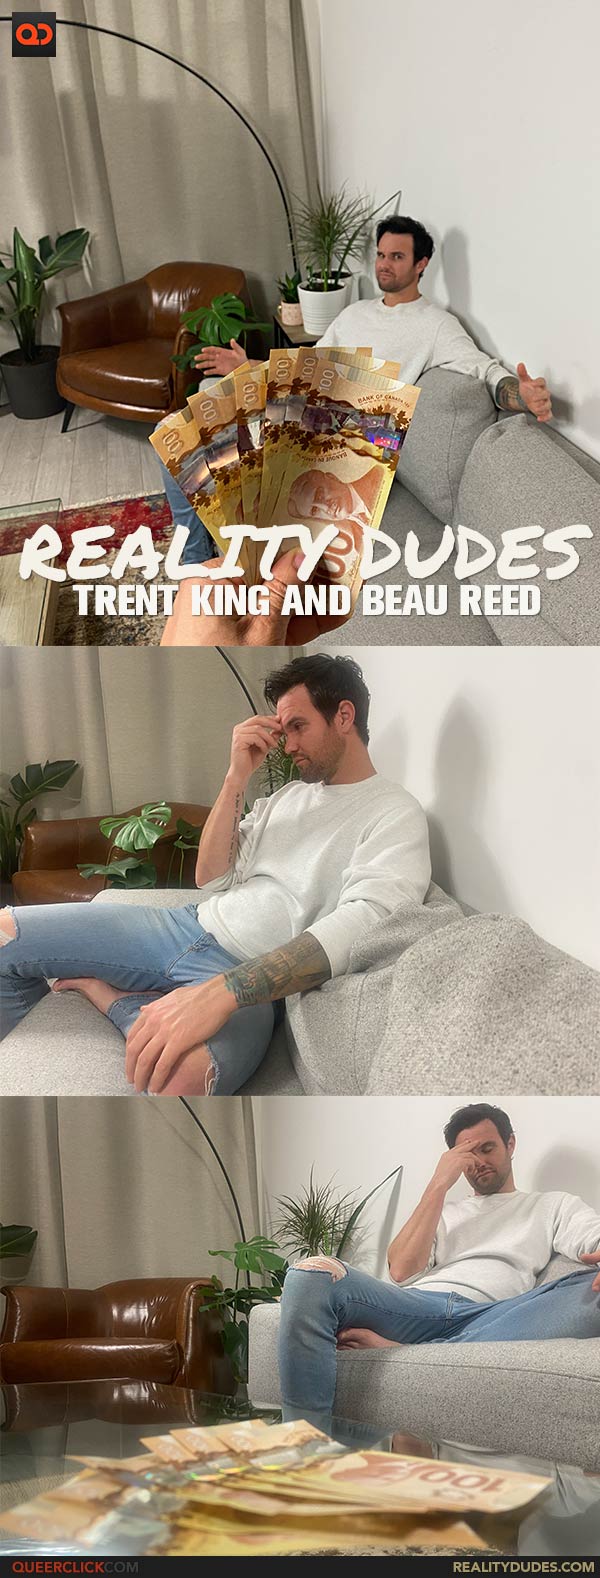 Reality Dudes: Trent King and Beau Reed